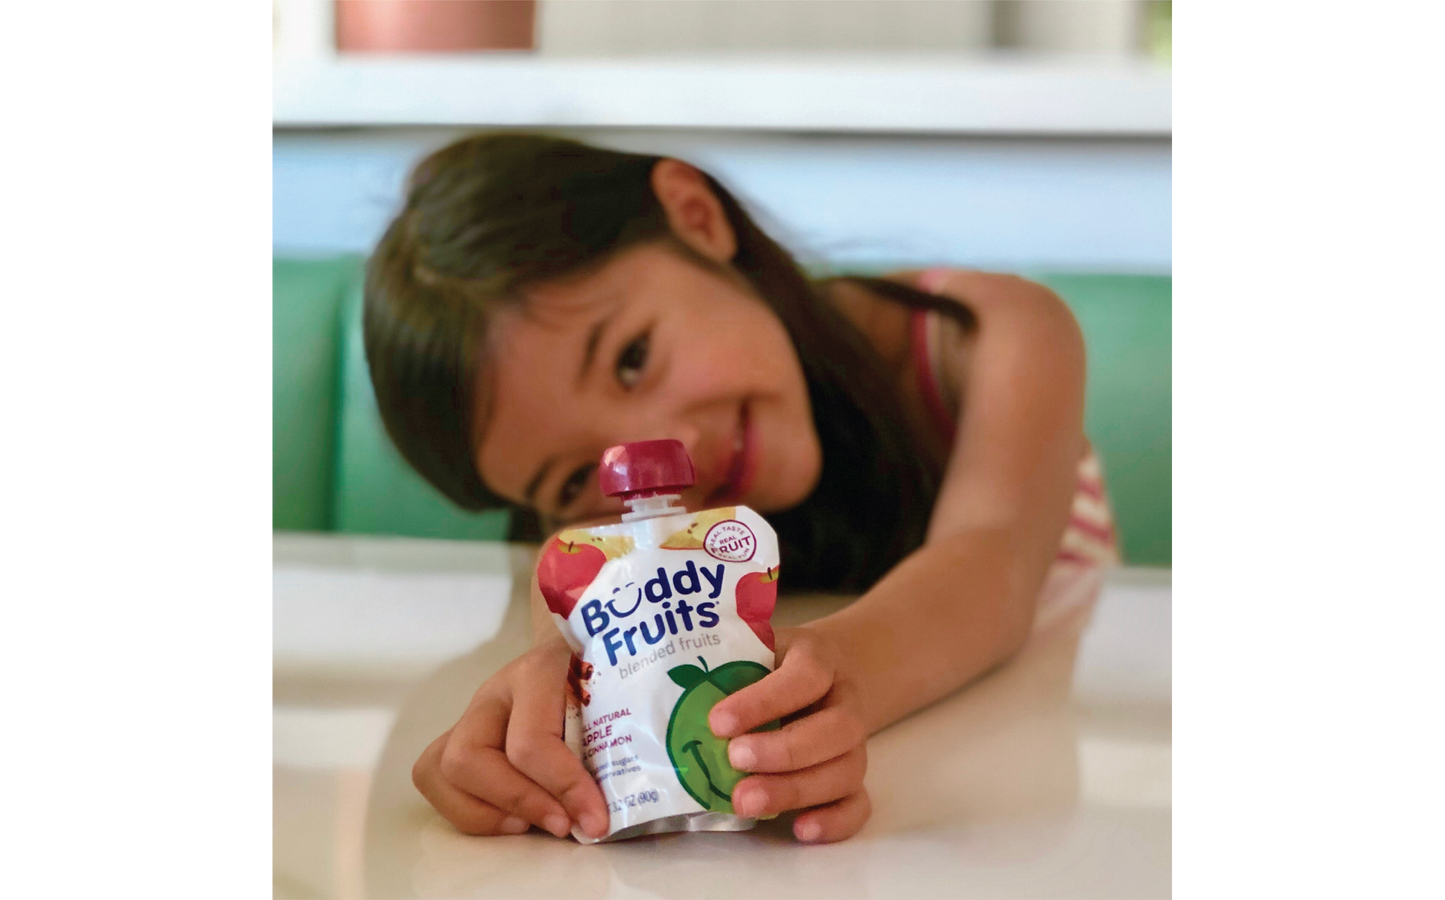 Happy young girl poses with her delicious Buddy Fruits Cinnamon & Apple fruit pouch at the dinner table.